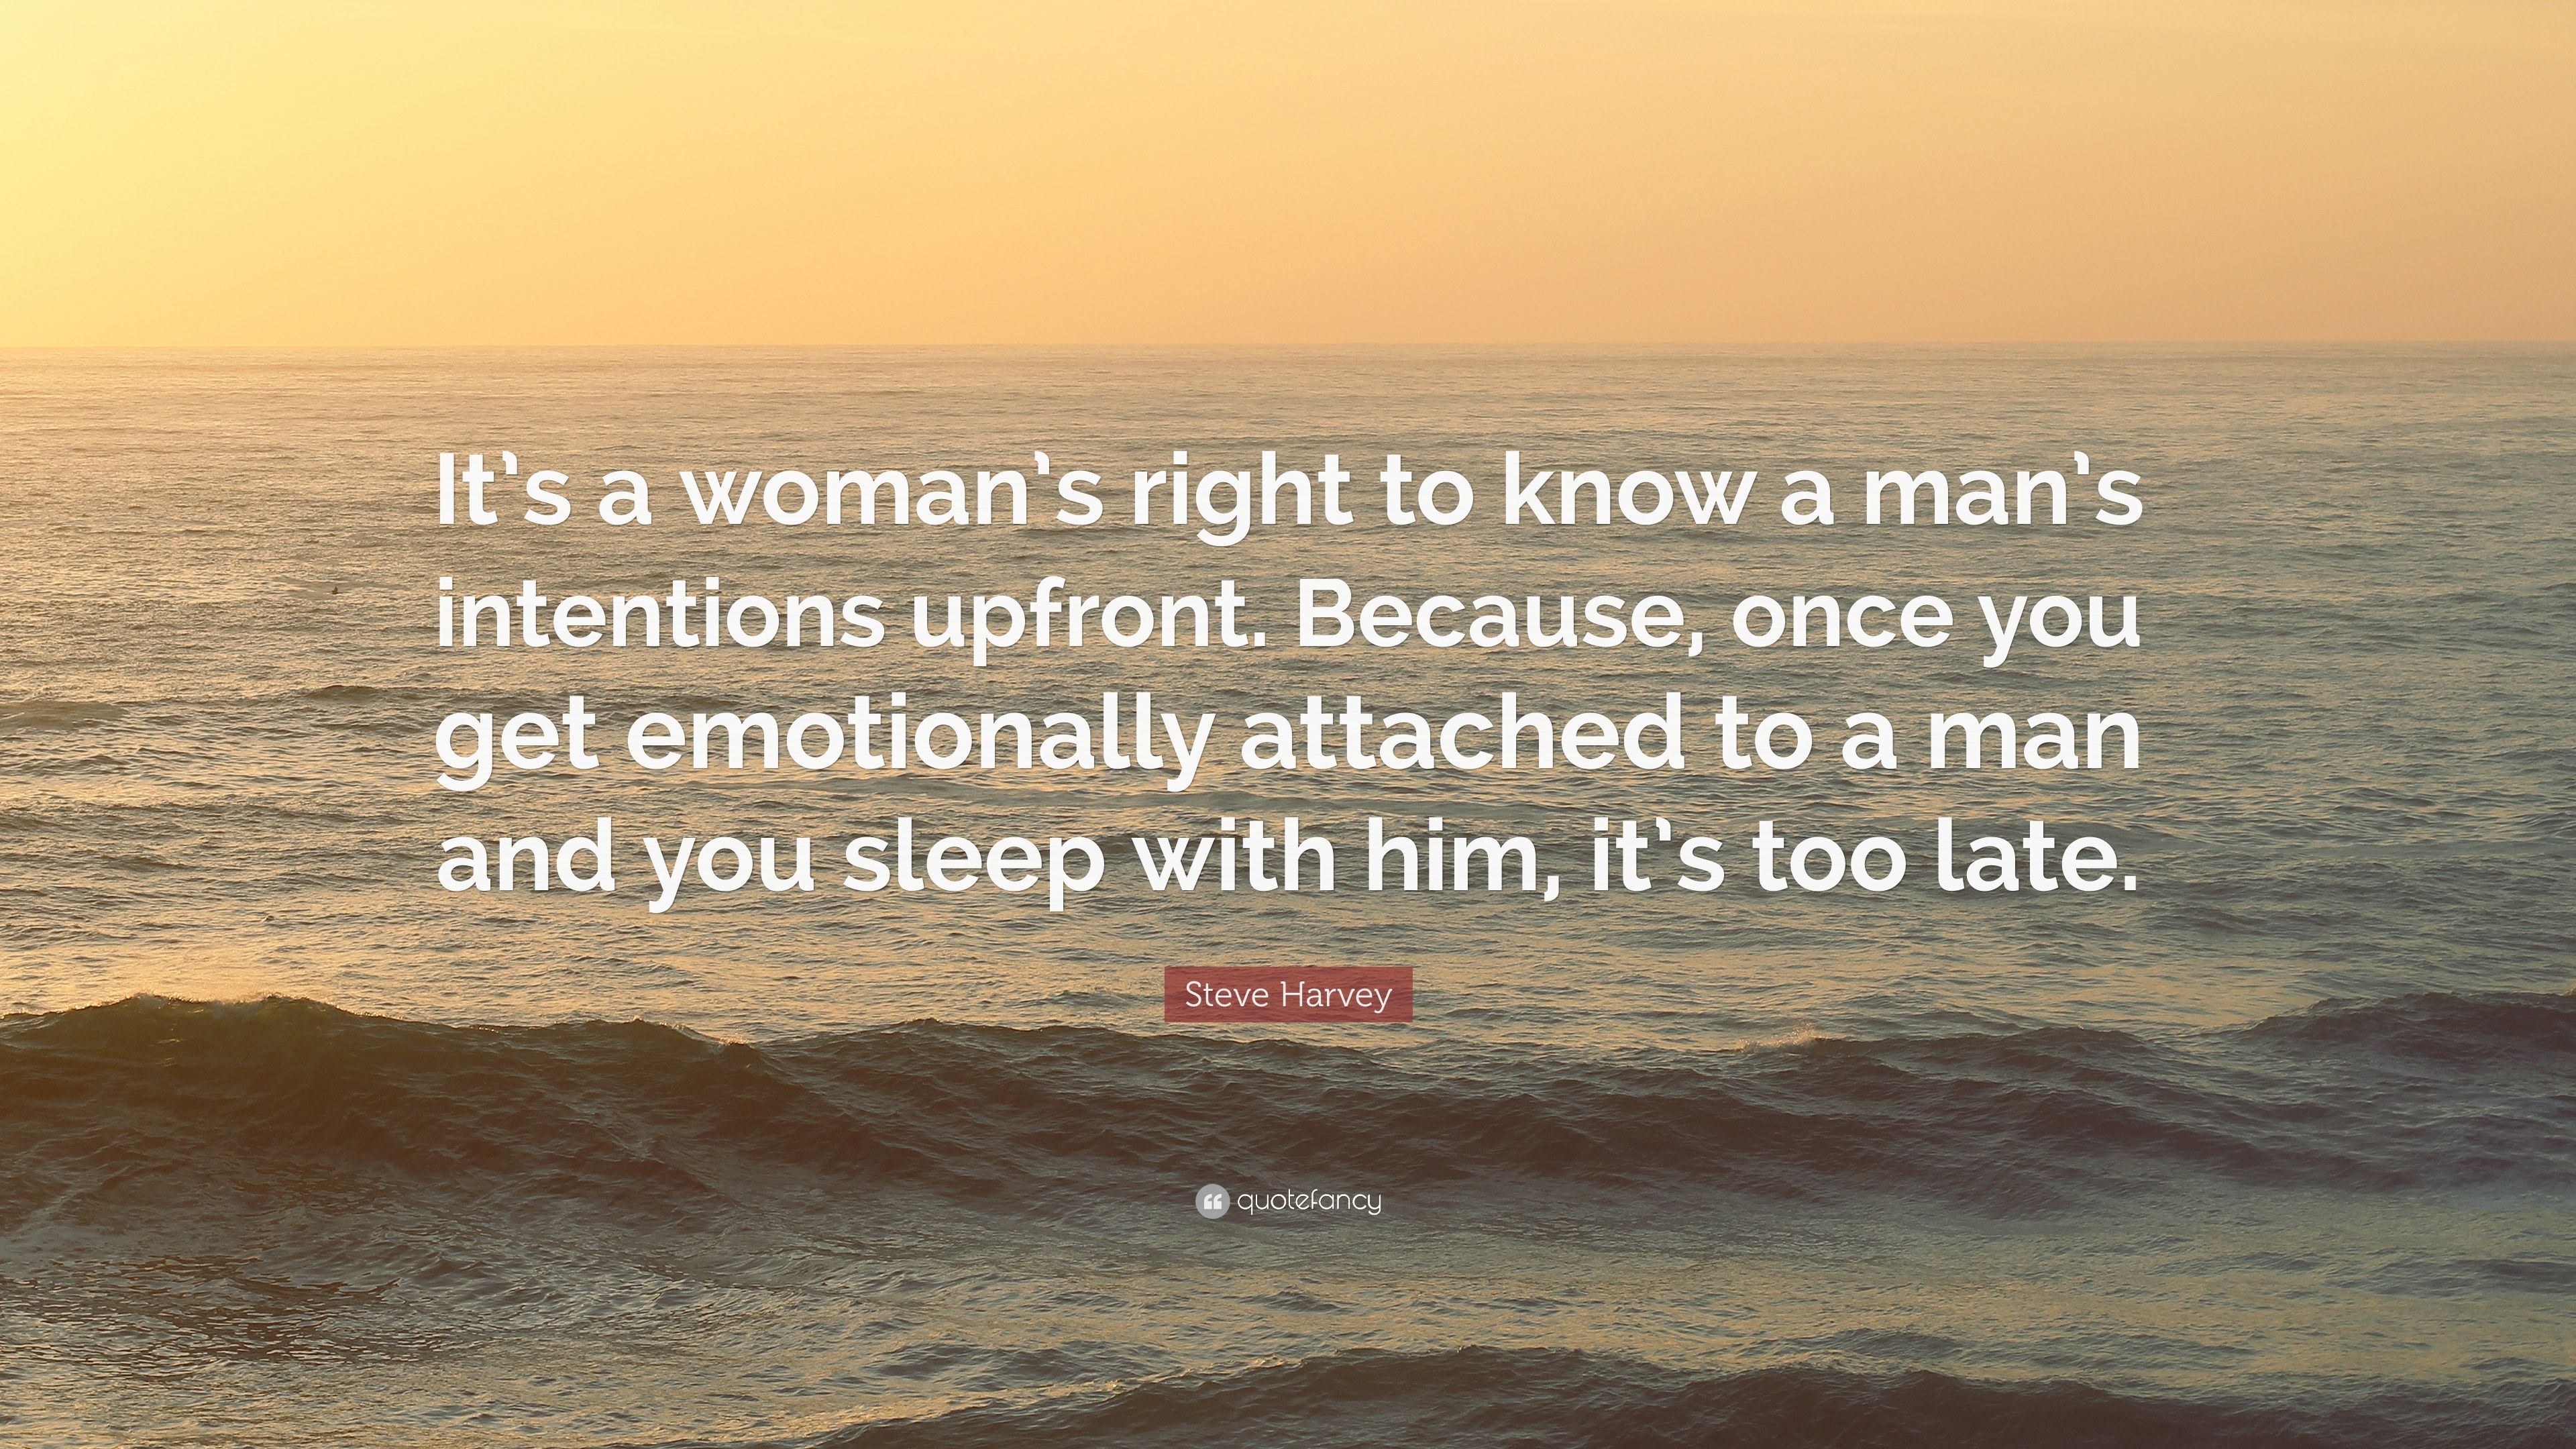 Steve Harvey Quote: “It's a woman's right to know a man's intentions